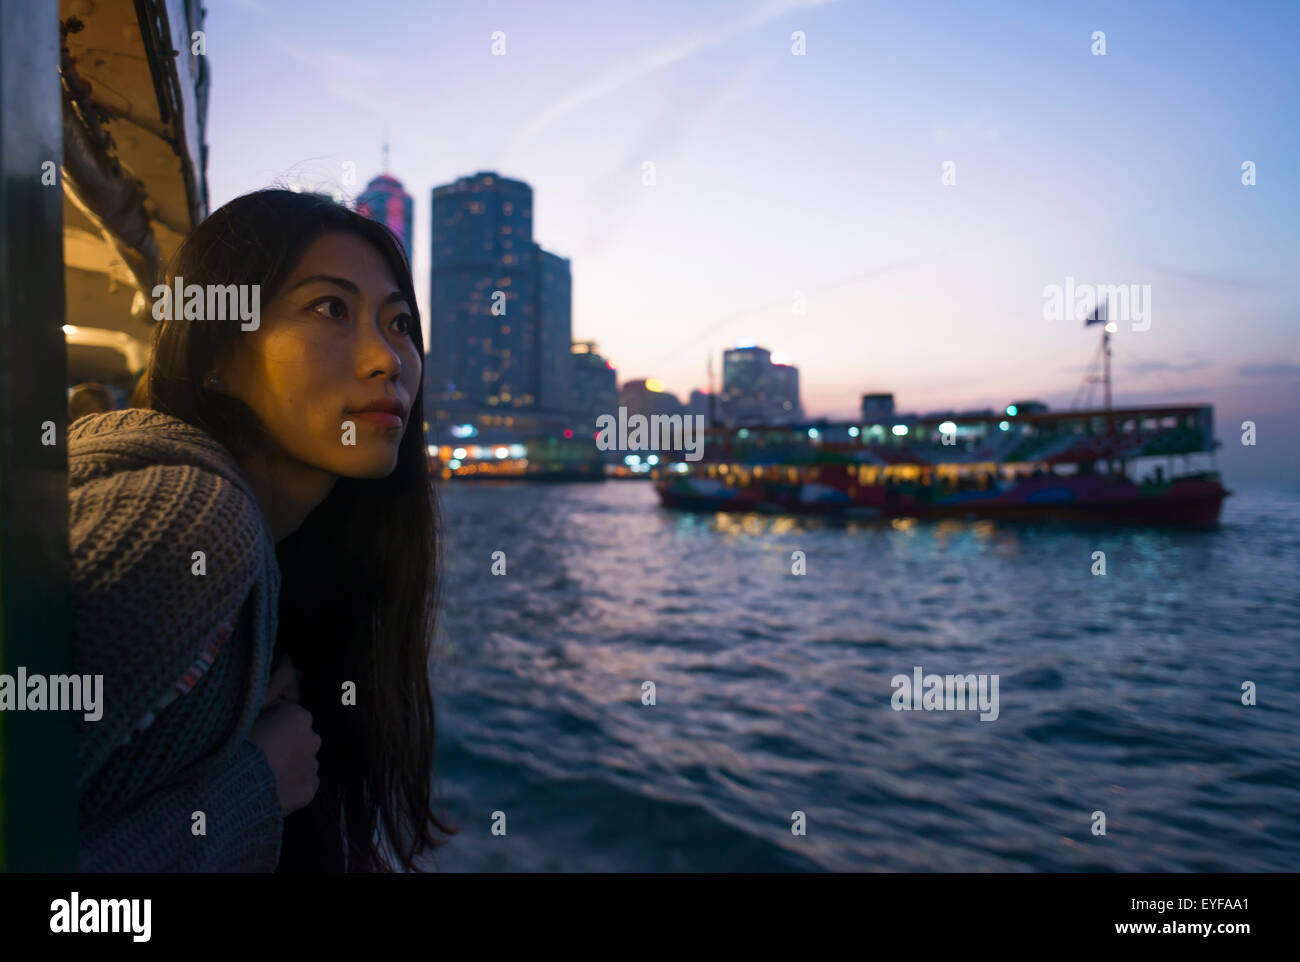 A young woman at the waterfront at sunset with a a boat and skyline in the background, Kowloon; Hong Kong, China Stock Photo